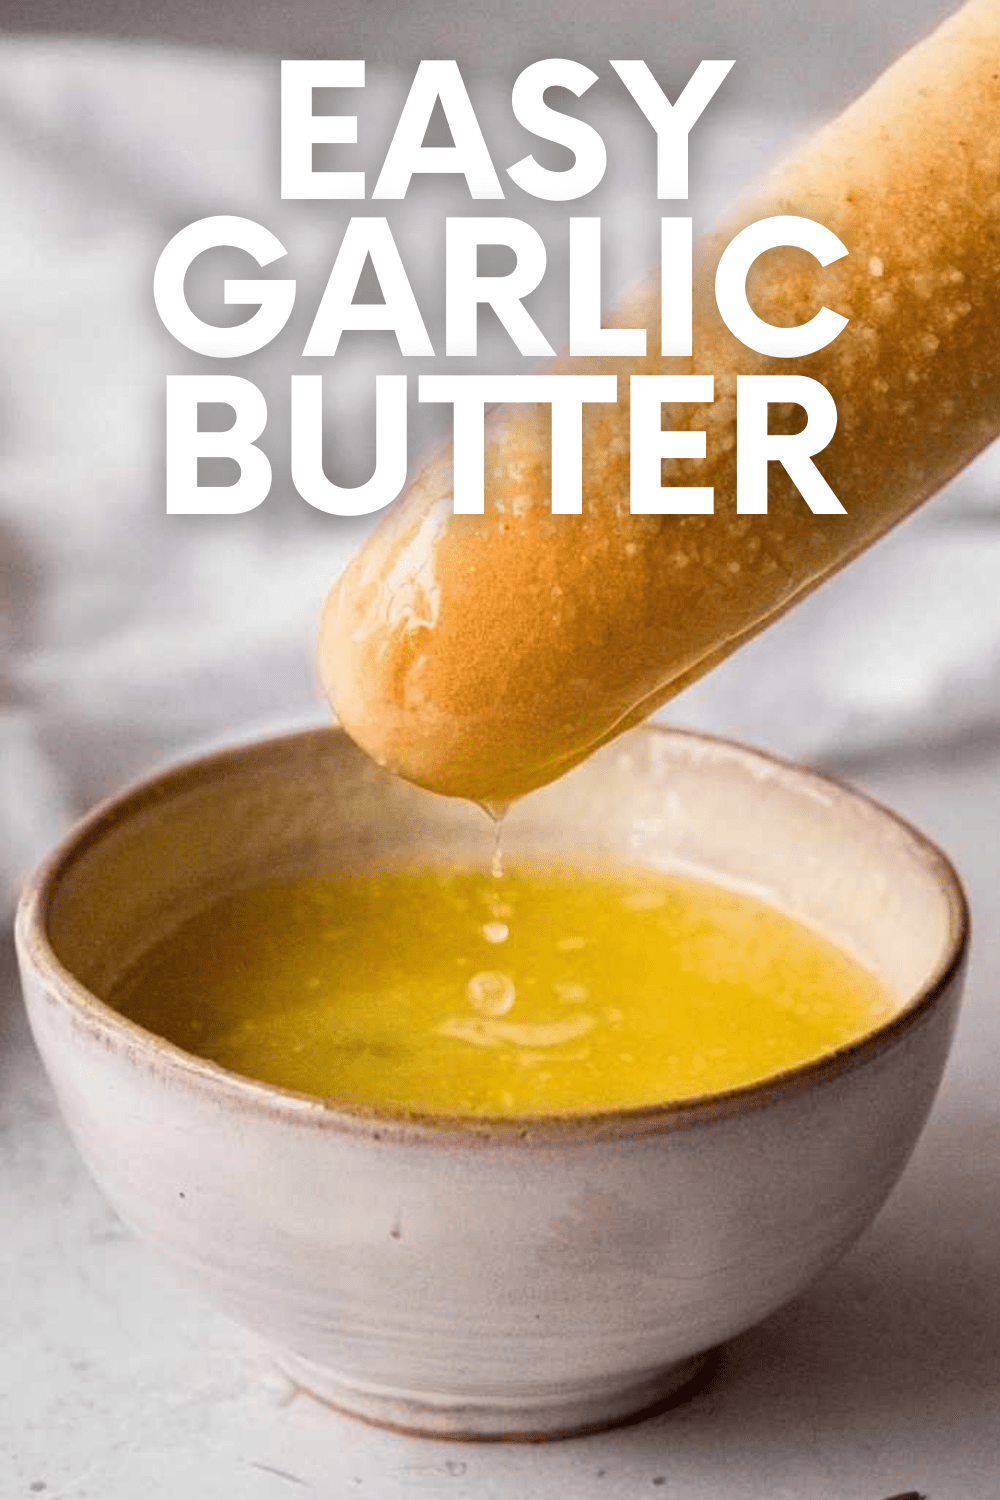 A soft breadstick dips into a bowl of melted garlic butter sauce. A text overlay reads "Easy Garlic Butter"